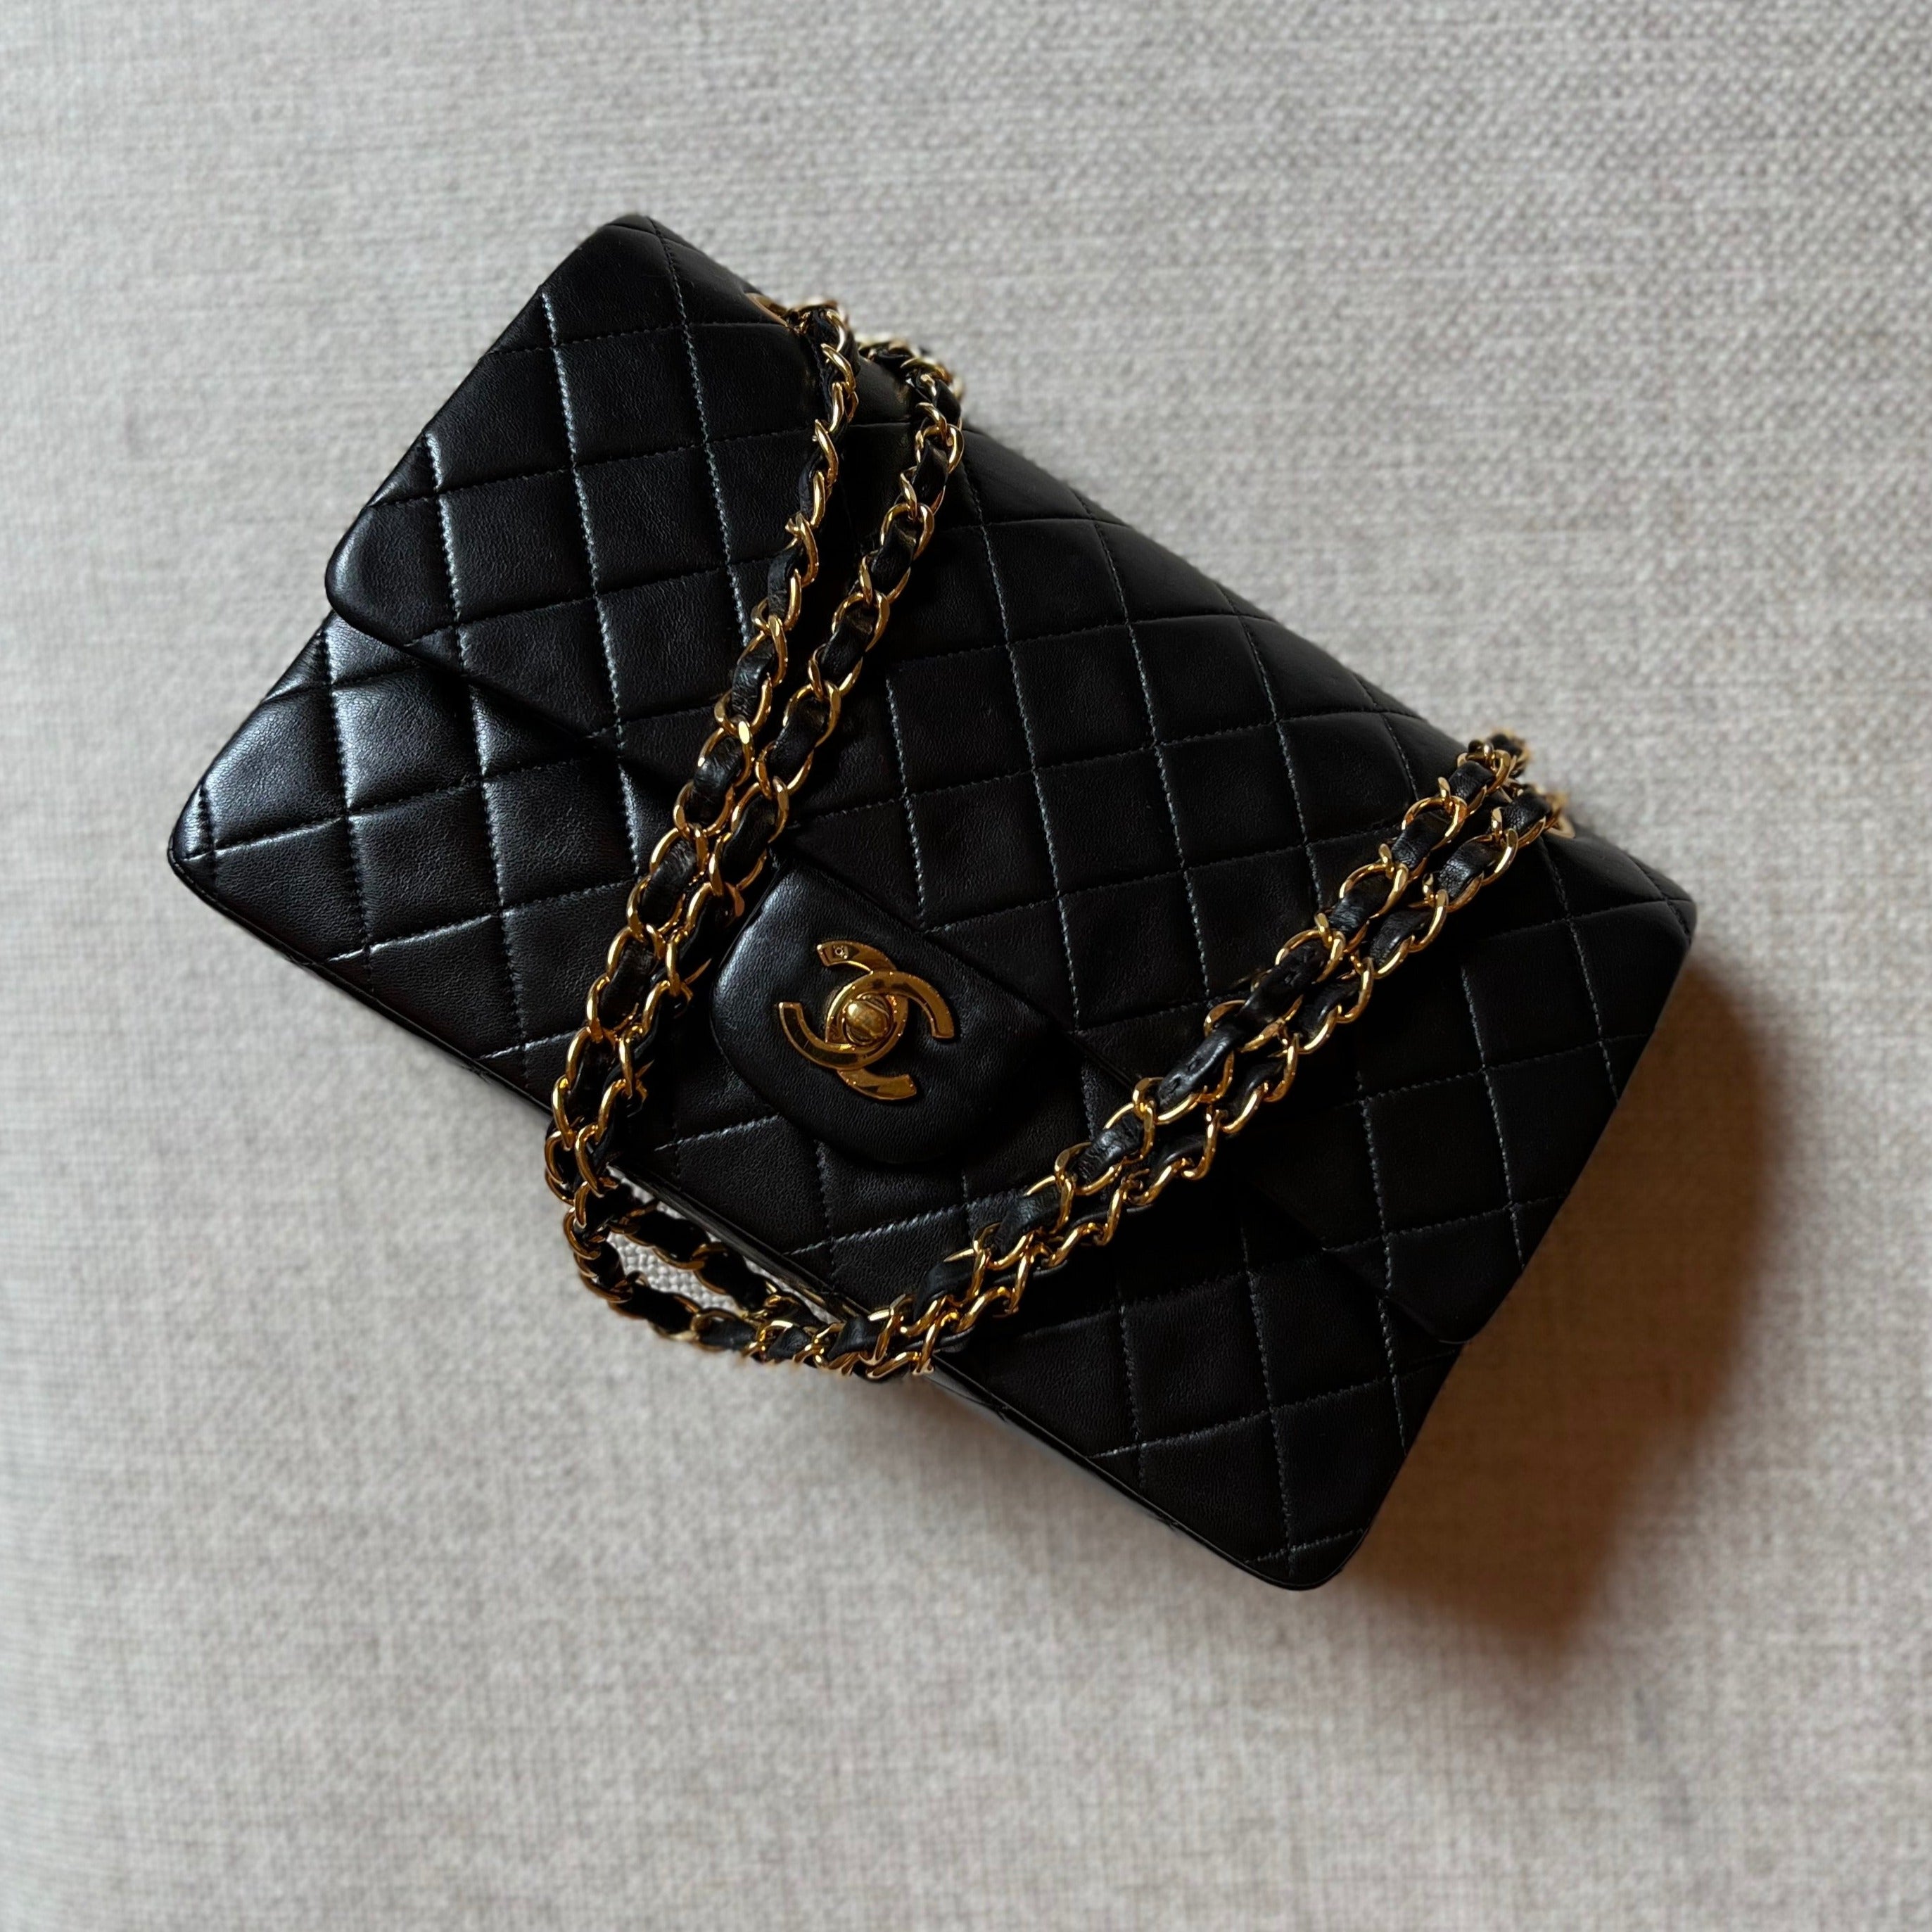 the classic flap bag by chanel